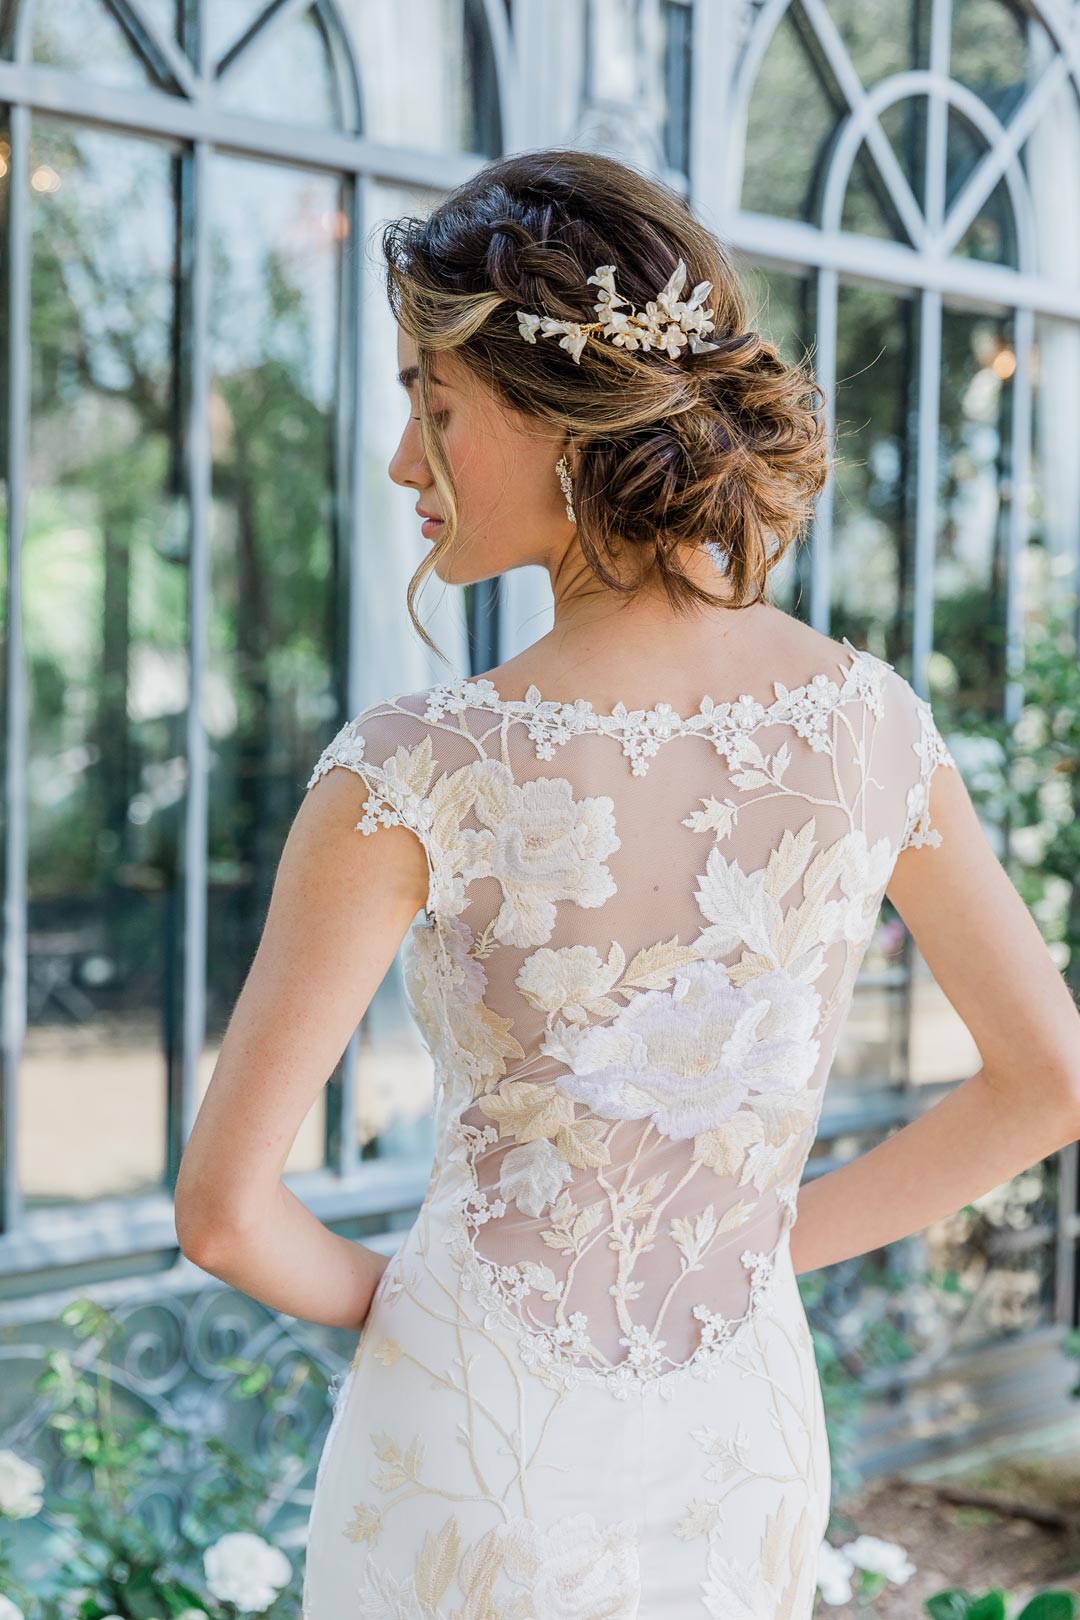 Cherry Blossum Wedding Dress back embroidery detail and Bridal Hair Accessory Claire Pettibone